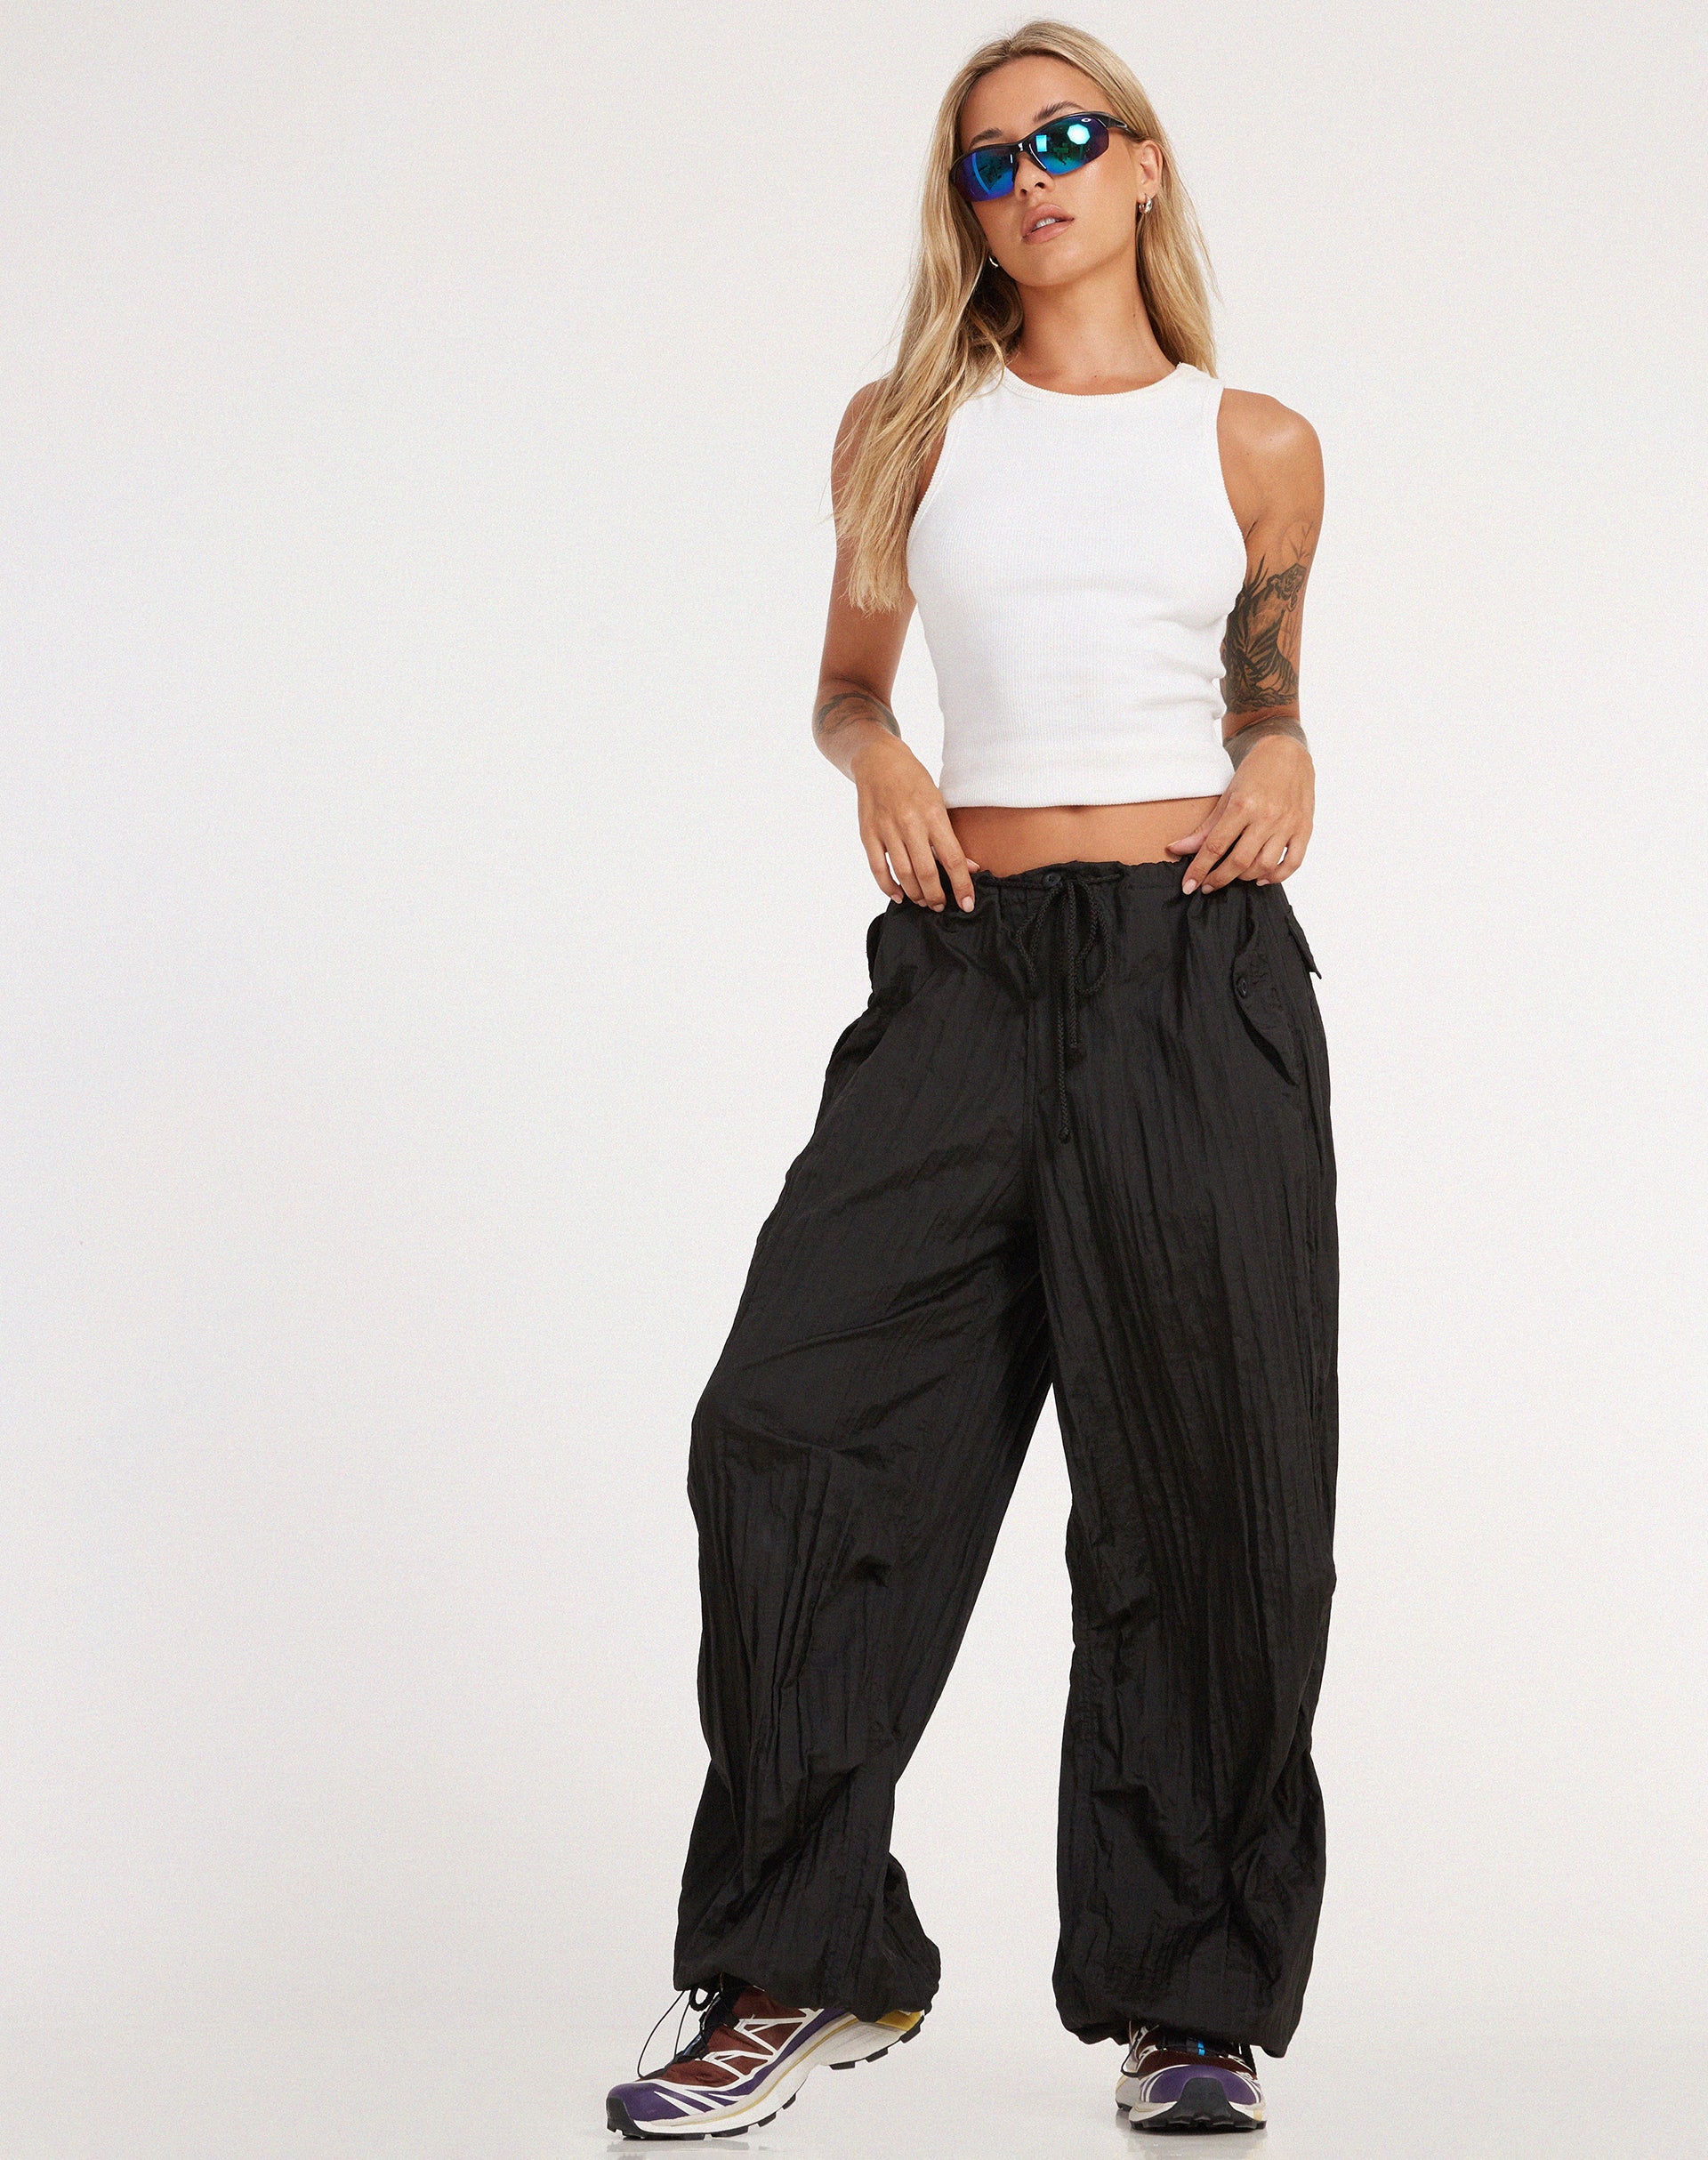 image of Chute Trouser in Parachute Black